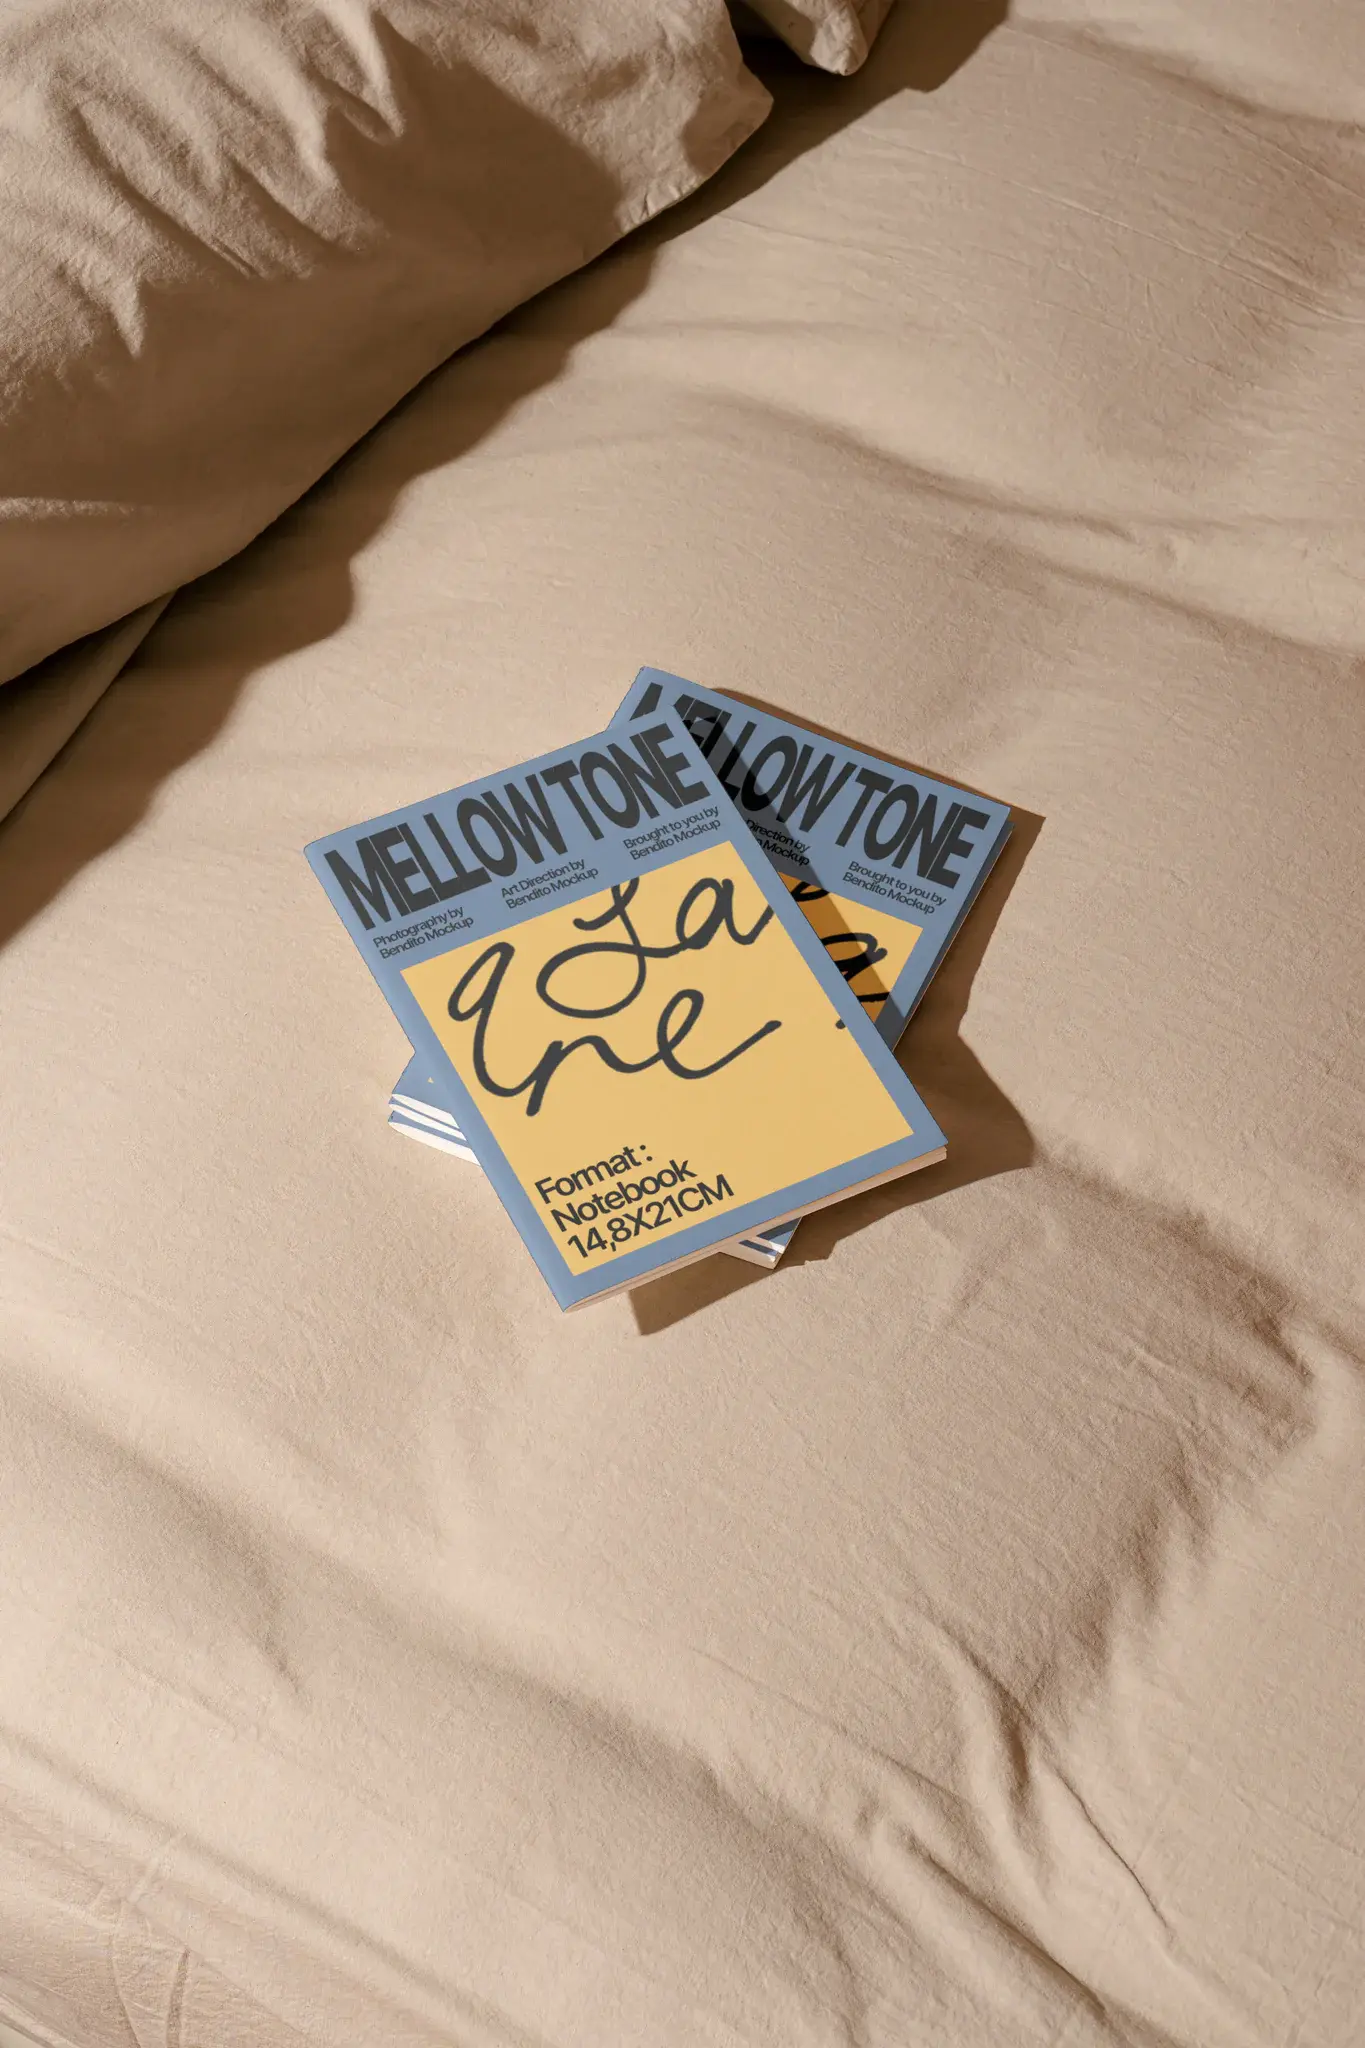 elegant style. Premium notebook mockup resting on the sheets of an unmade bed